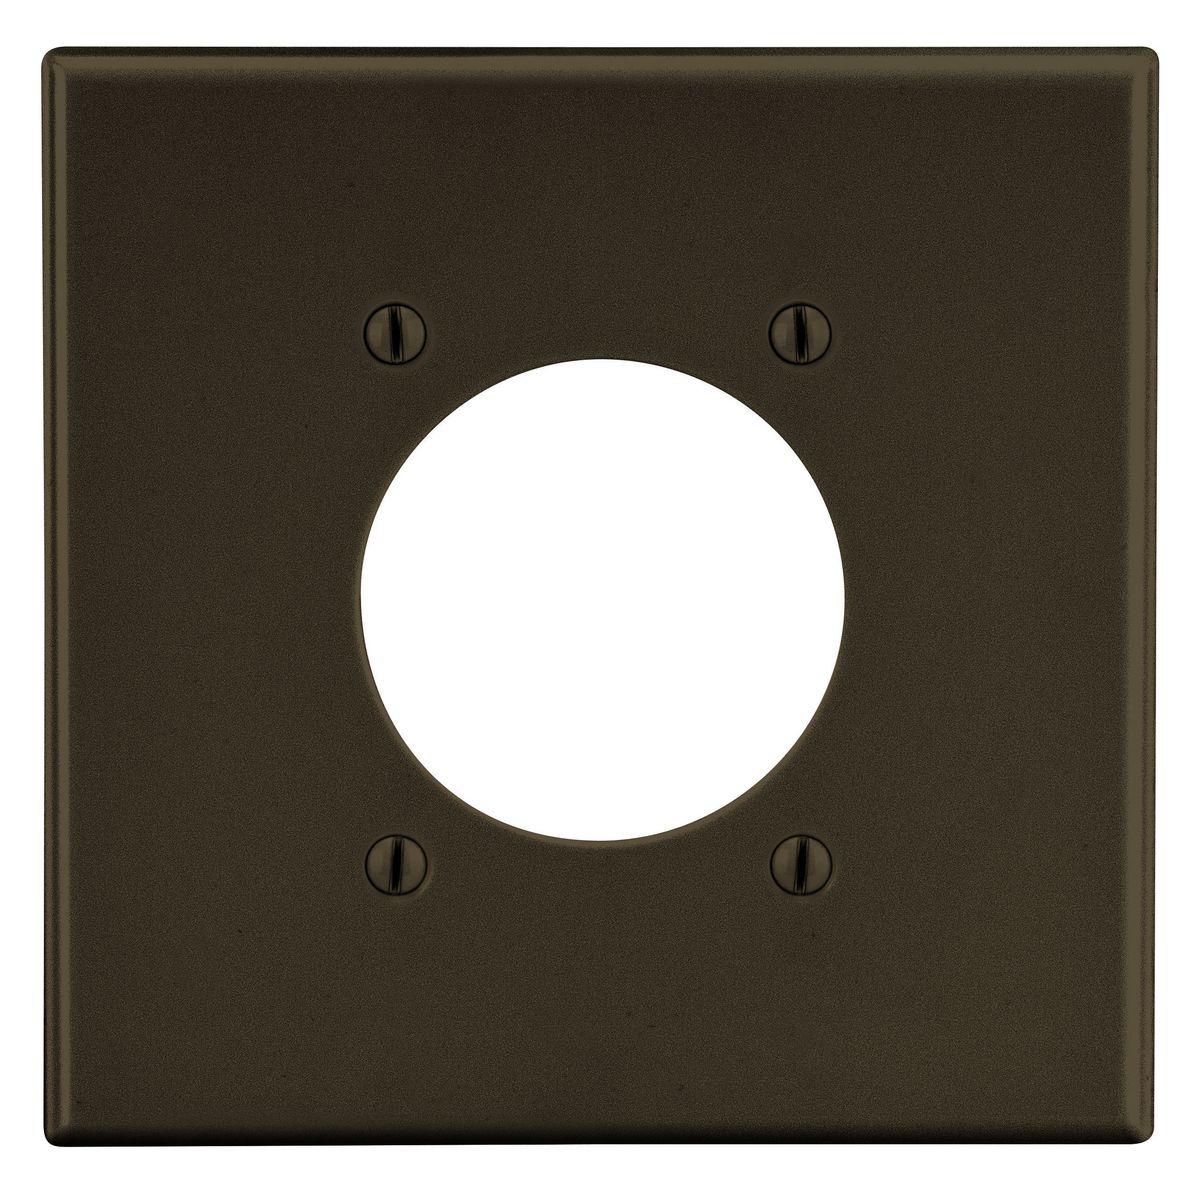 Hubbell PJ703 Wallplate,  Mid-Size 2-Gang, 2.15" Opening, Brown  ; High-impact, self-extinguishing polycarbonate material ; More Rigid ; Sharp lines and less dimpling ; Smooth satin finish ; Blends into wall with an optimum finish ; Smooth Satin Finish